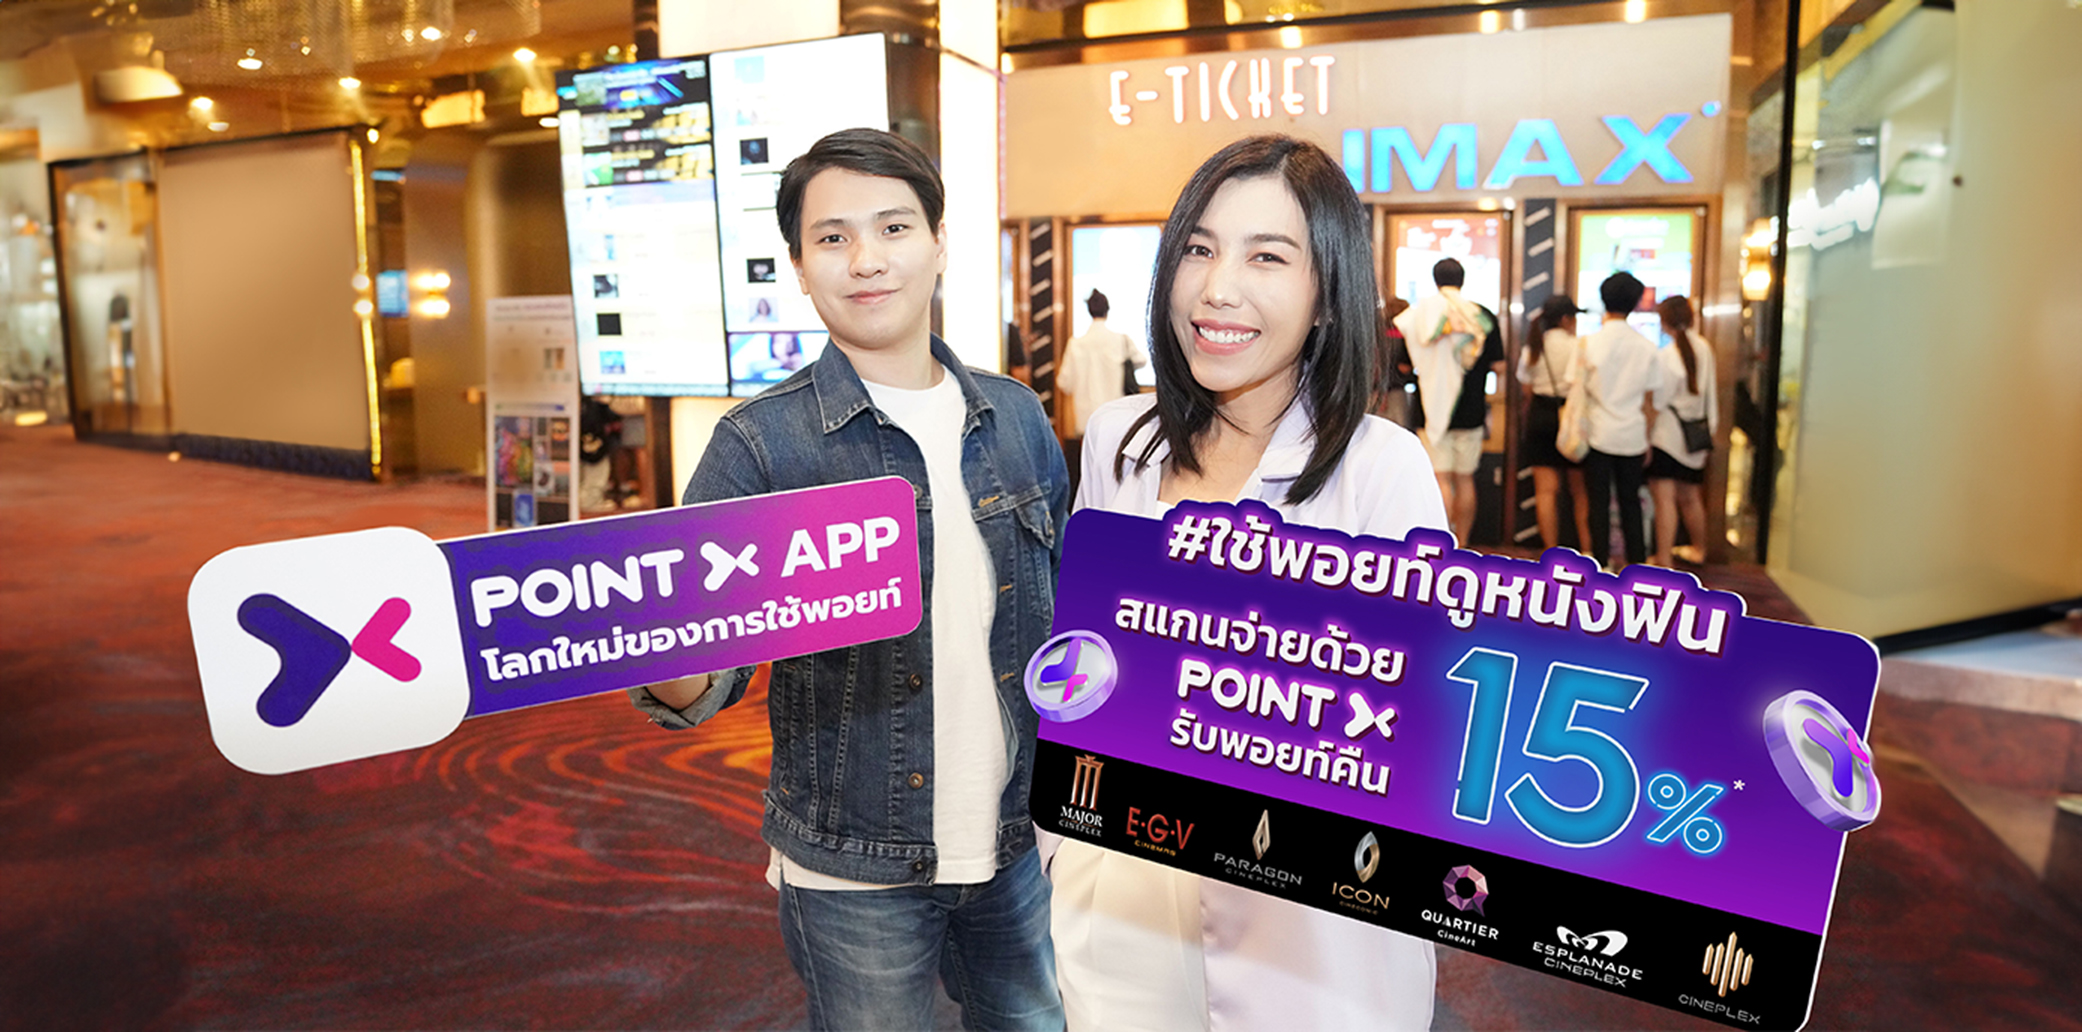 PointX delights movie enthusiasts with ‘Watch Great Movies, Earn Great Deals’ Campaign:Get 15% in points back at Major Cineplex cinemas when scanning to pay